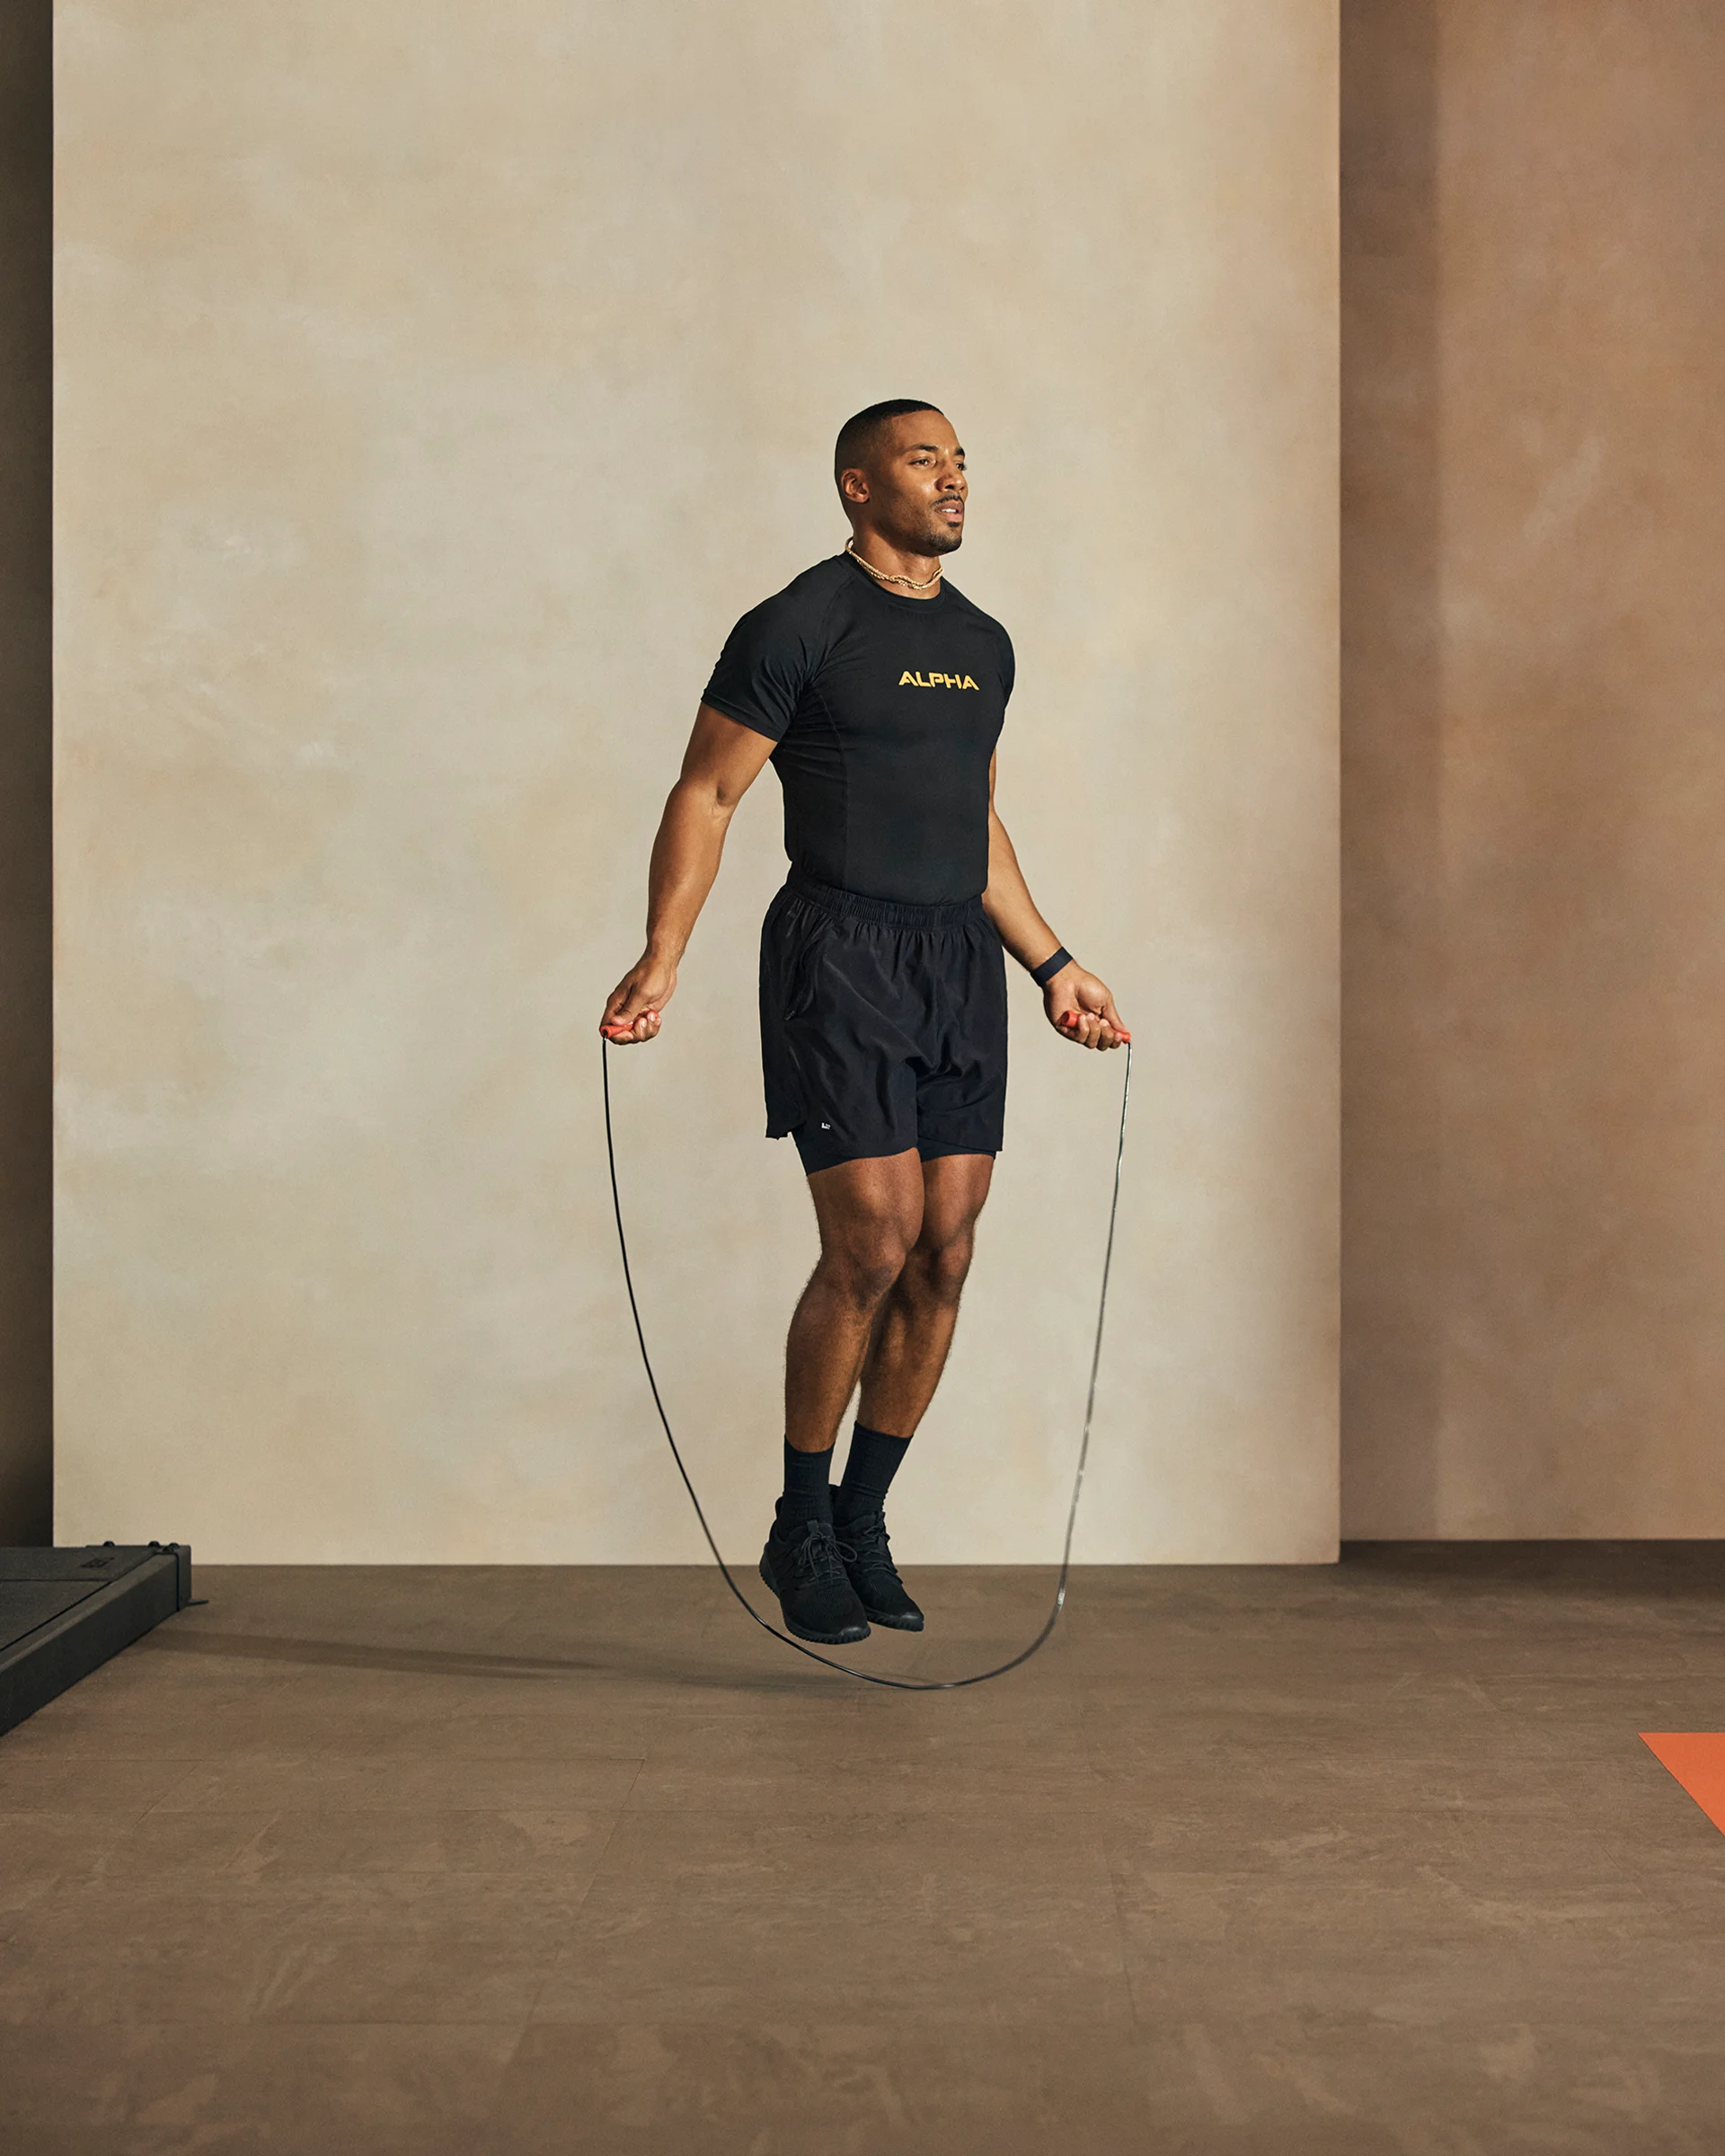 A Life Time member jumping rope in an Alpha class.